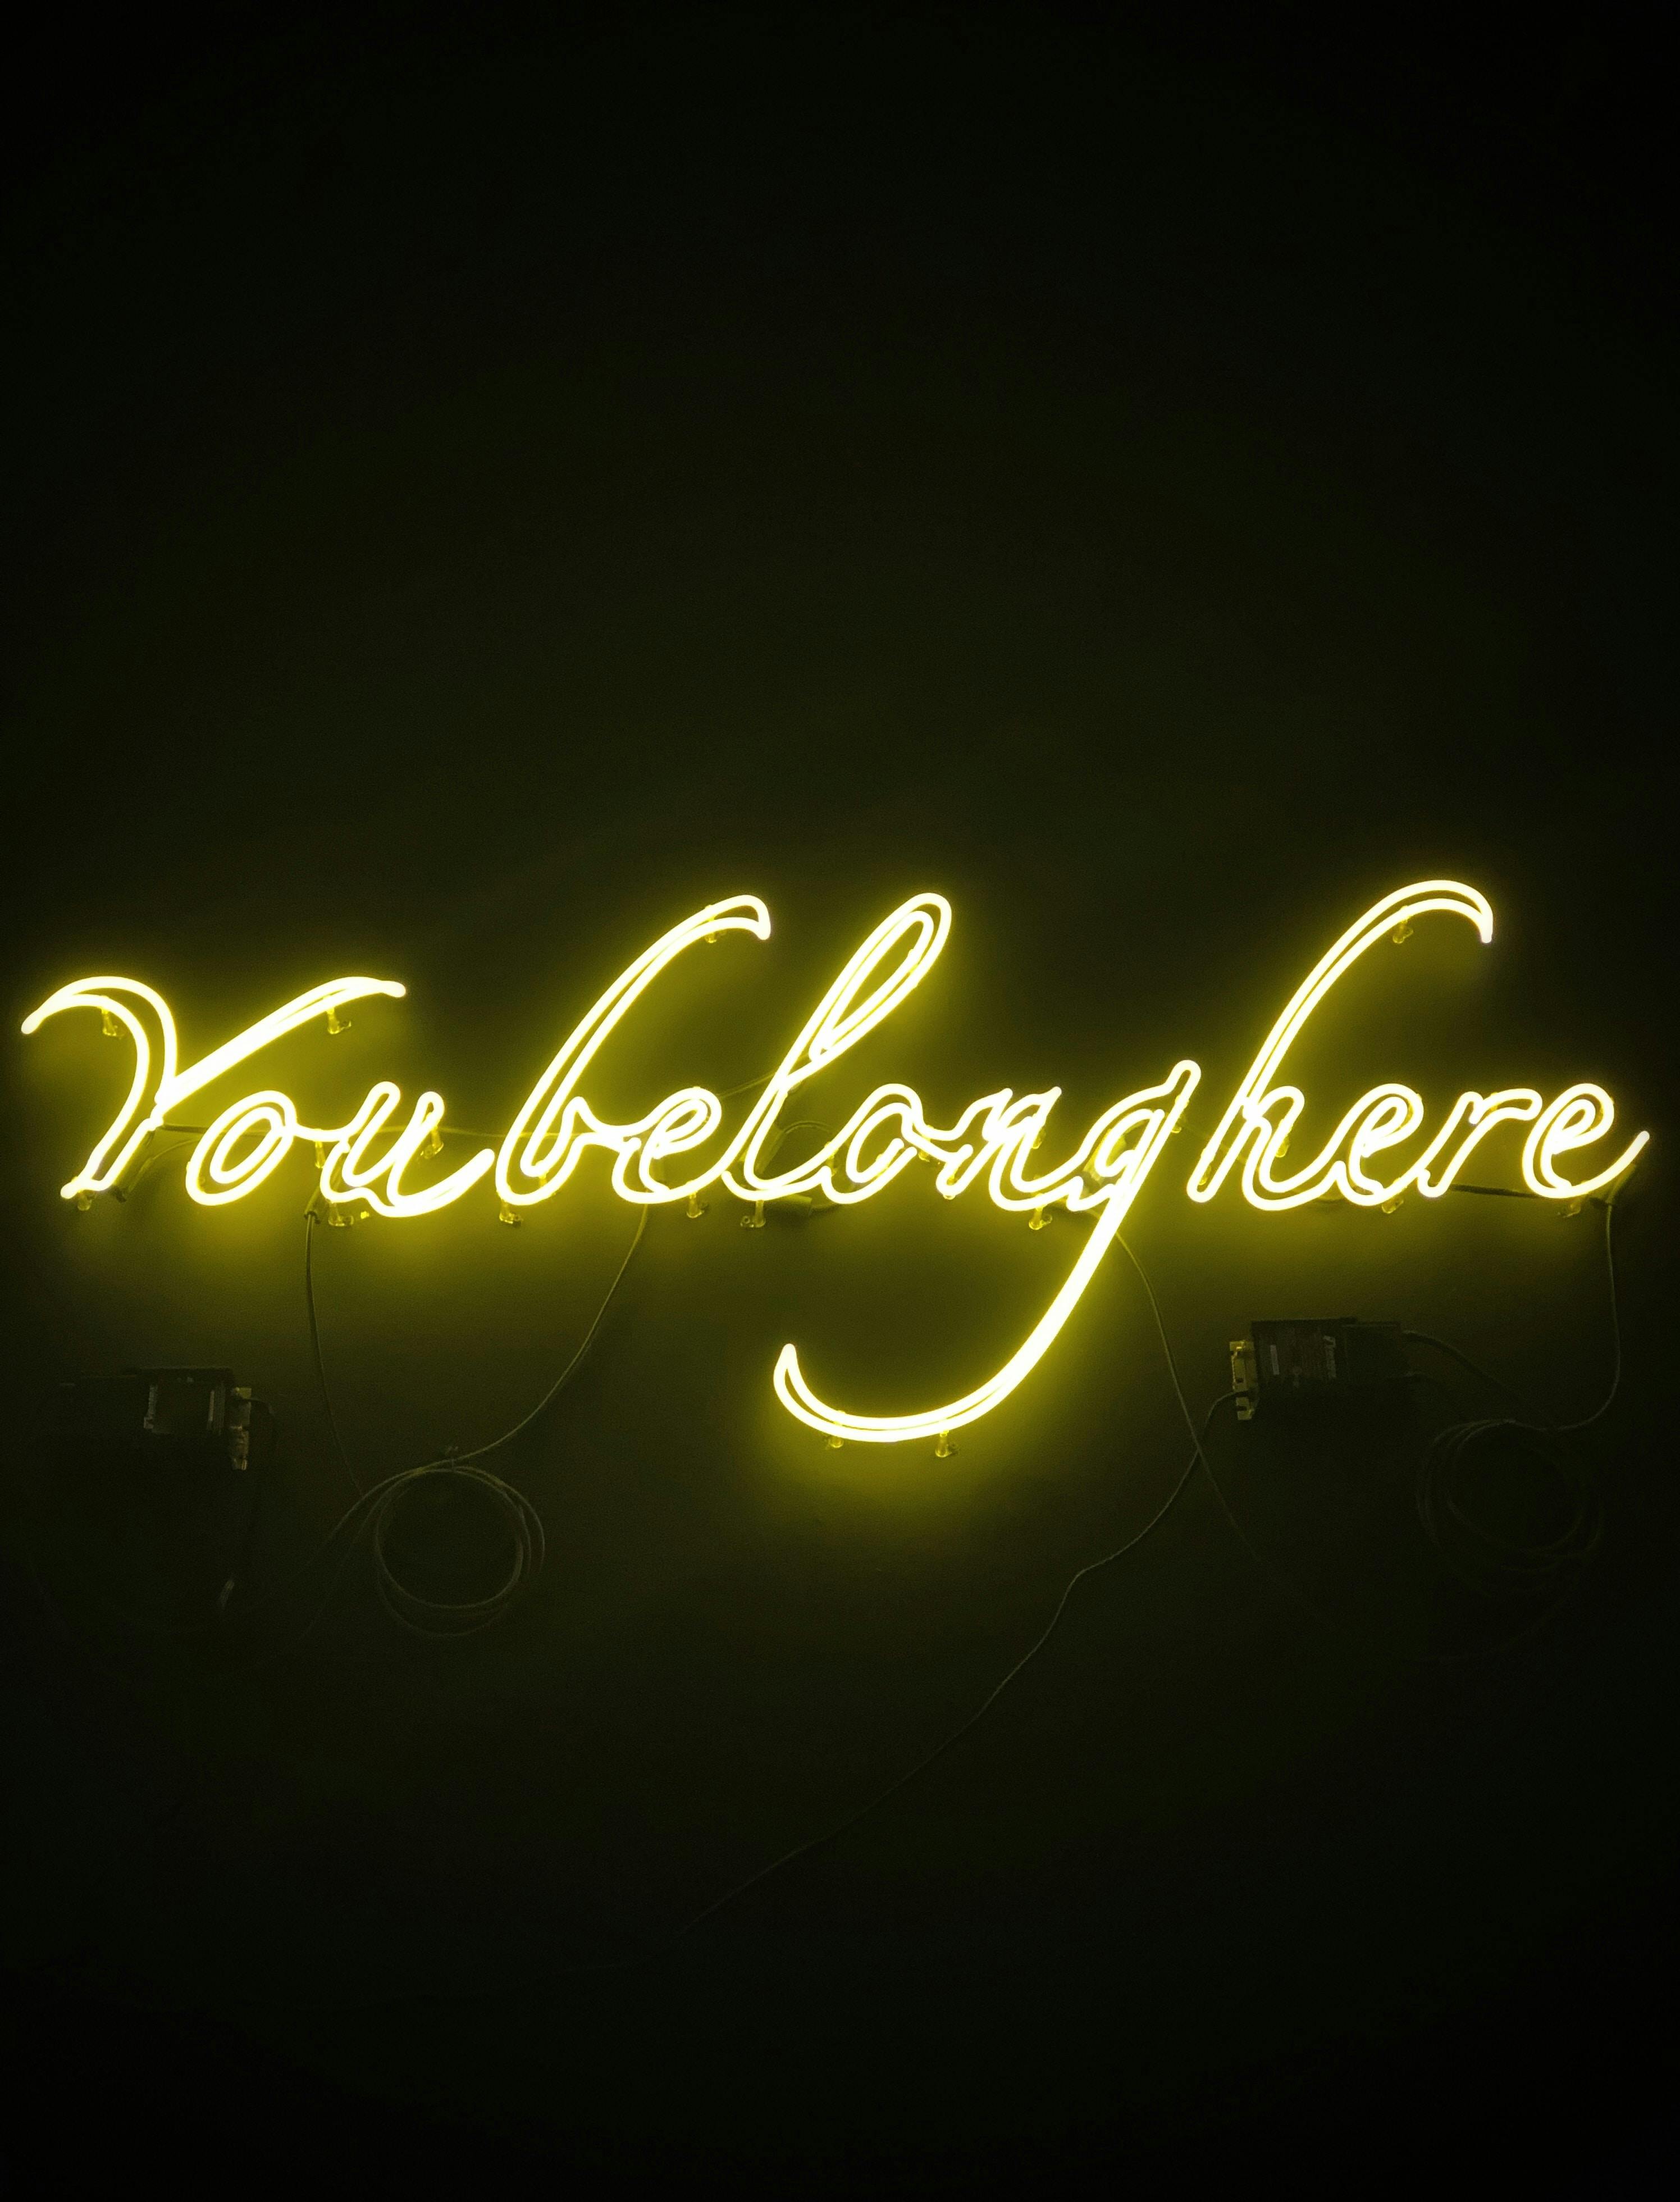 Neon lights that spell out "You belong here"